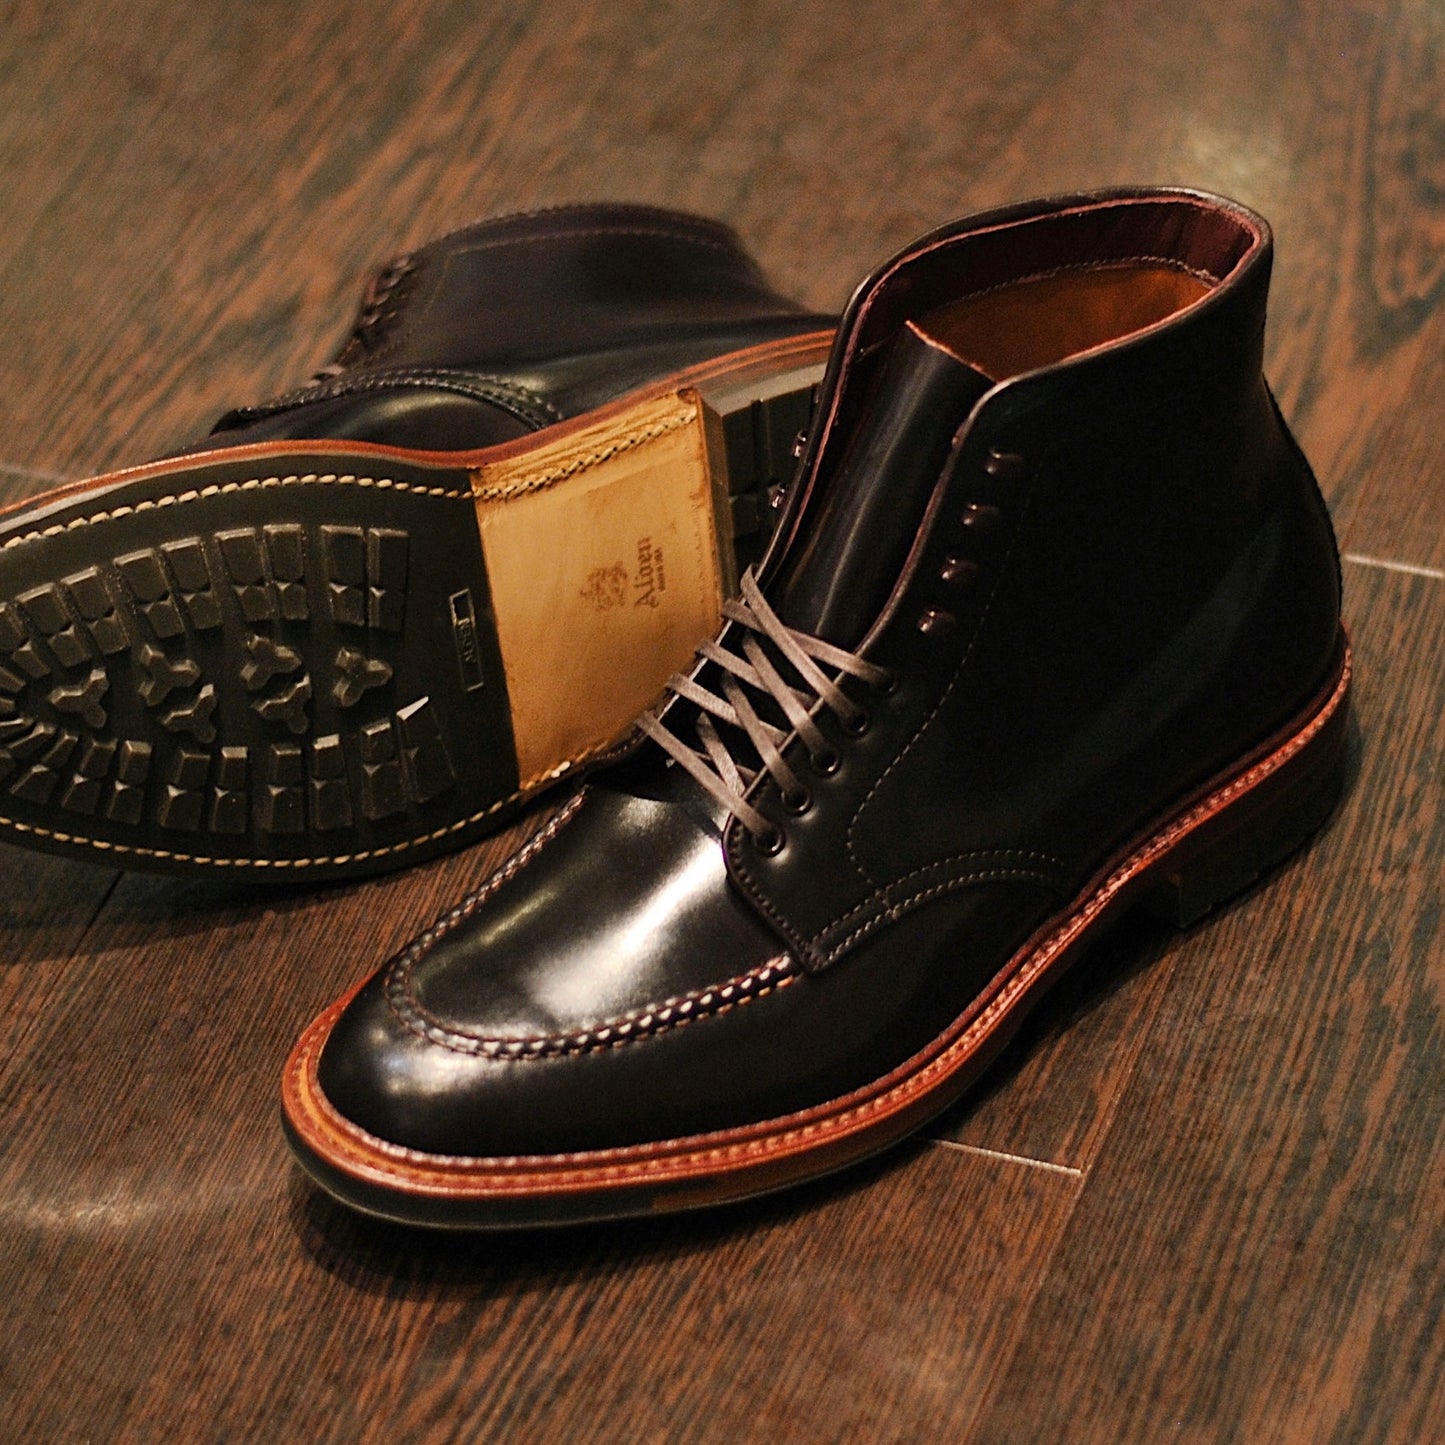 "Sodo" Handsewn U-Tip Boot in Color 8 Shell Cordovan, Barrie Last